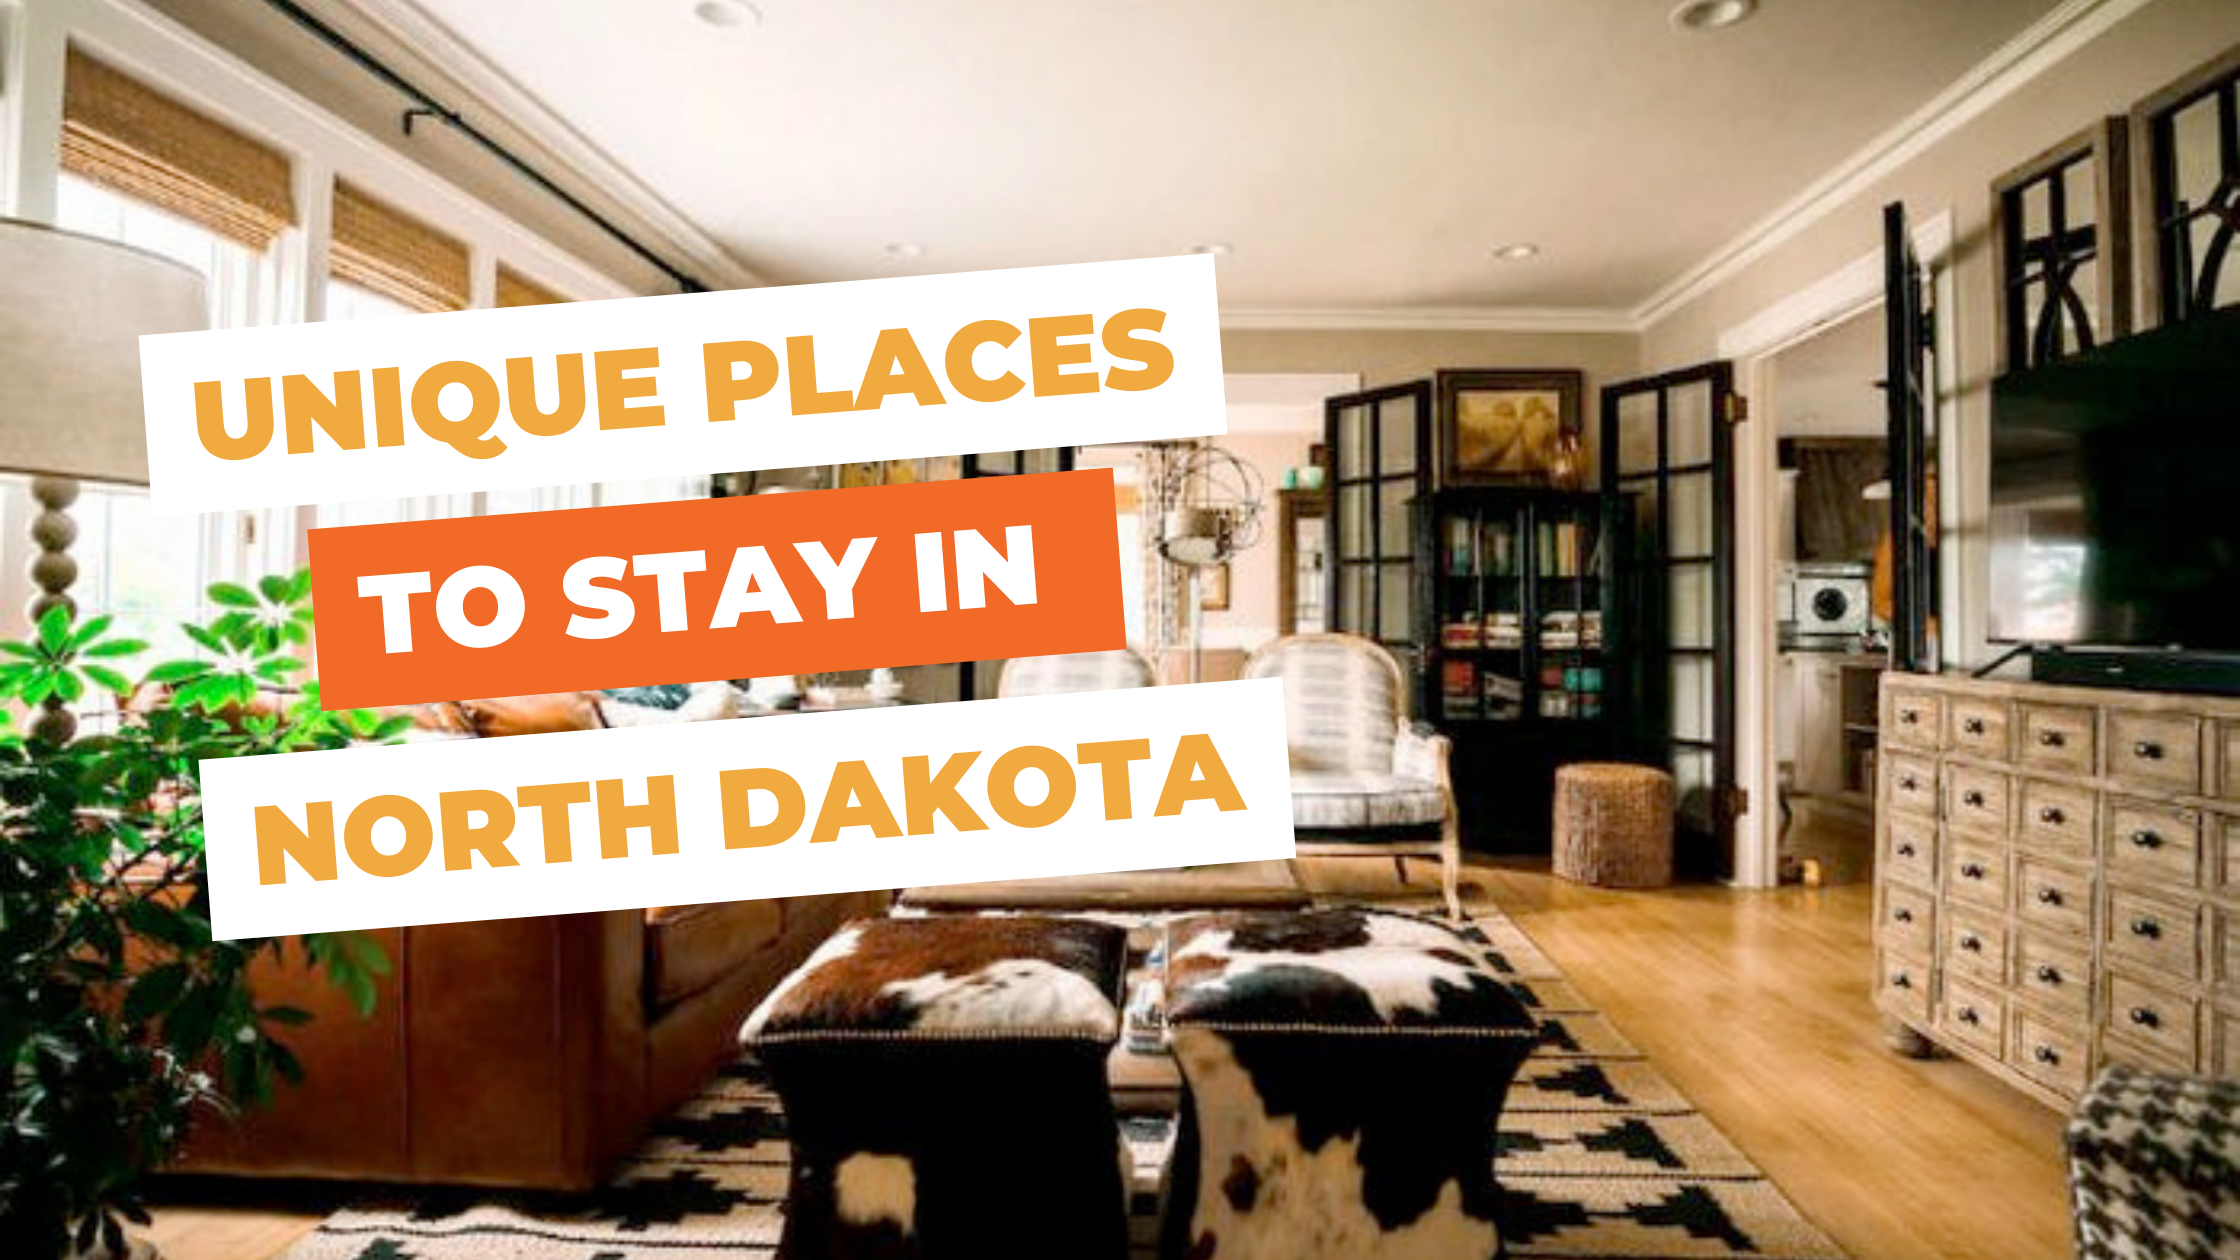 10 Unique Places To Stay In North Dakota For A Quiet Relaxing Getaway